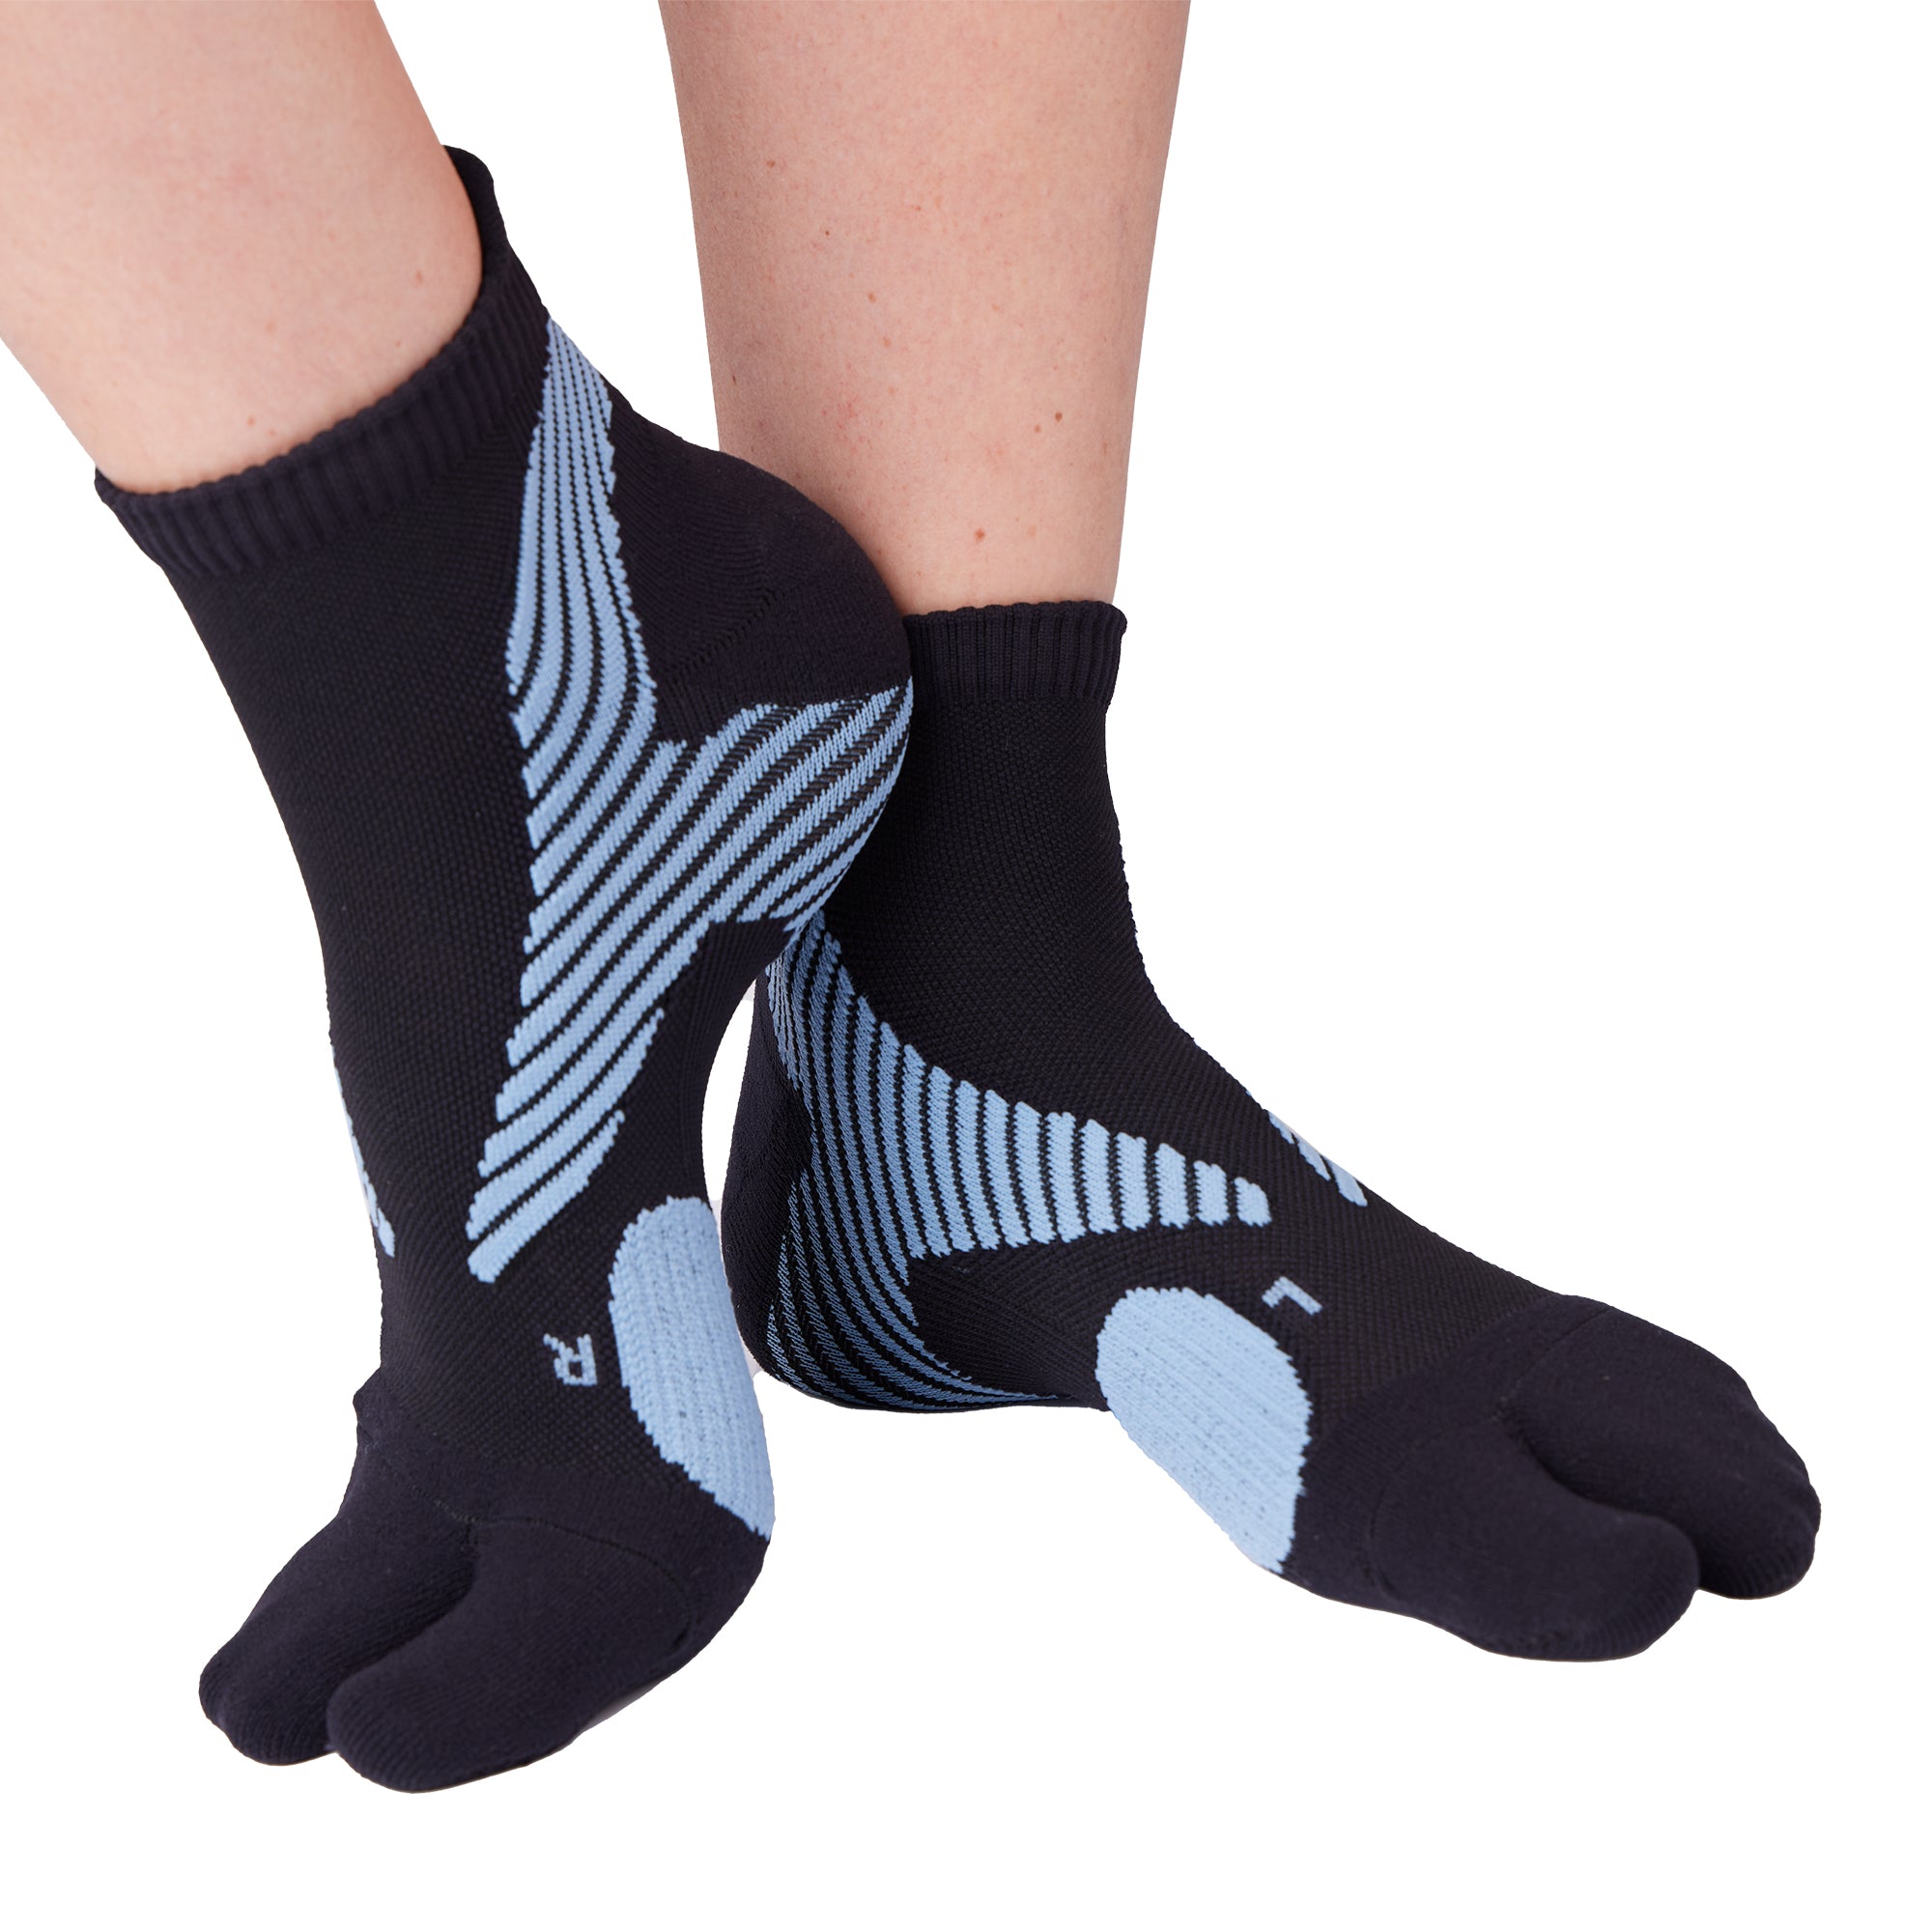 How to Find Extra-Wide Socks for Bunions, Wide Feet, and Swollen